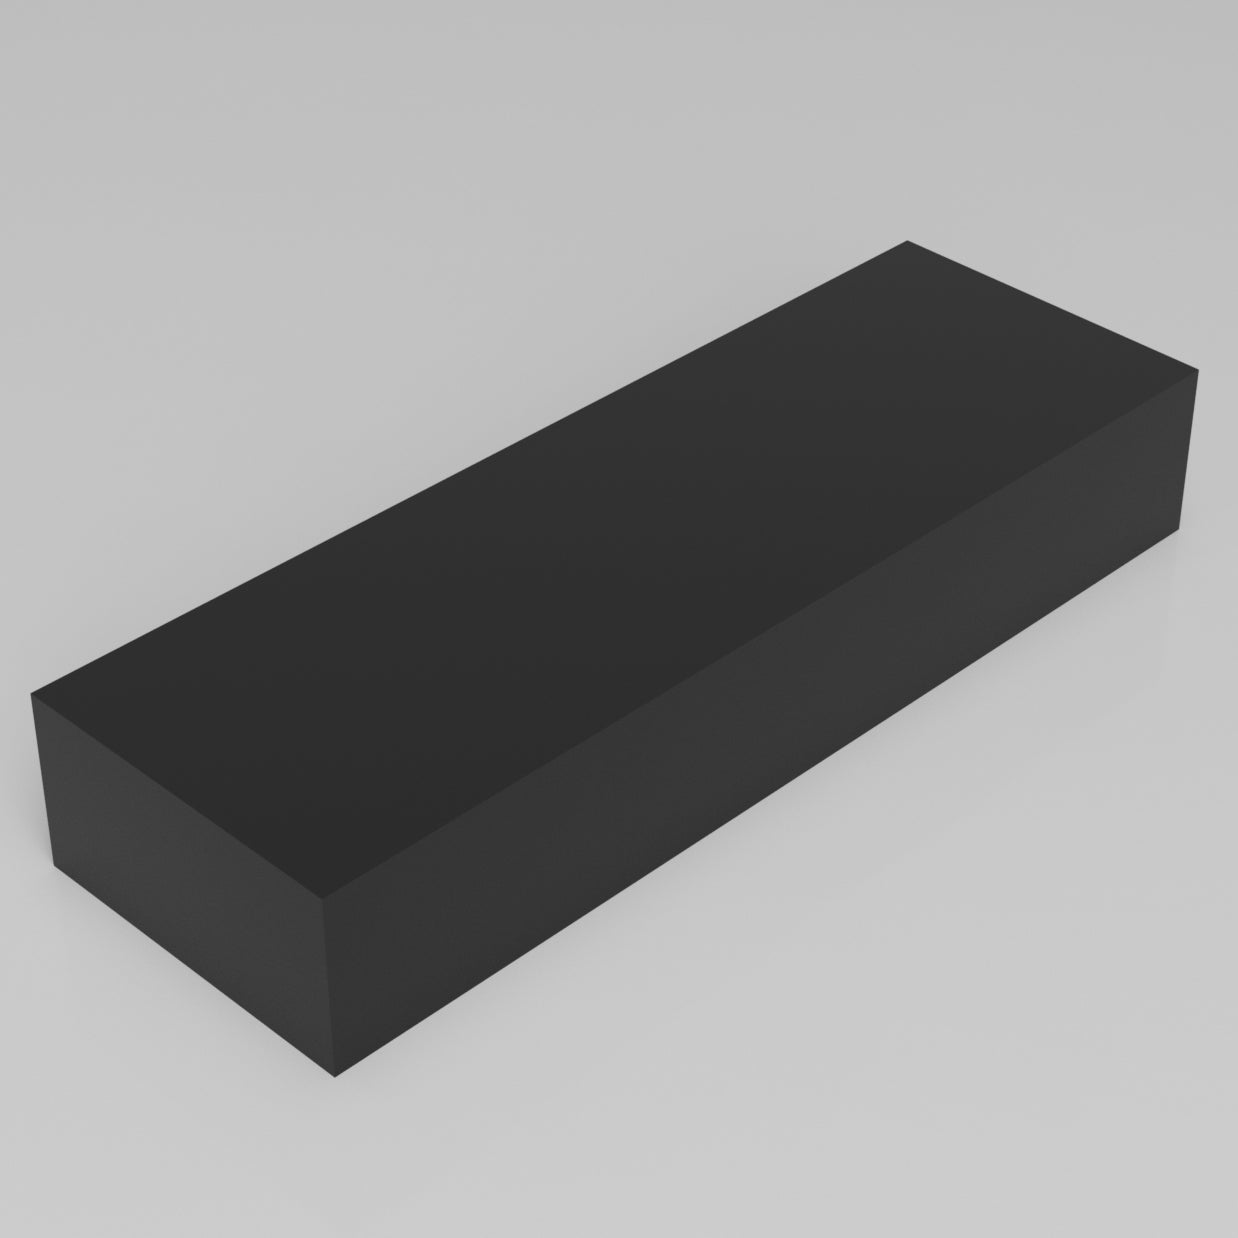 Machinable Wax Rectangular Block Front View 3 Inch by 6 Inch by 18 Inch